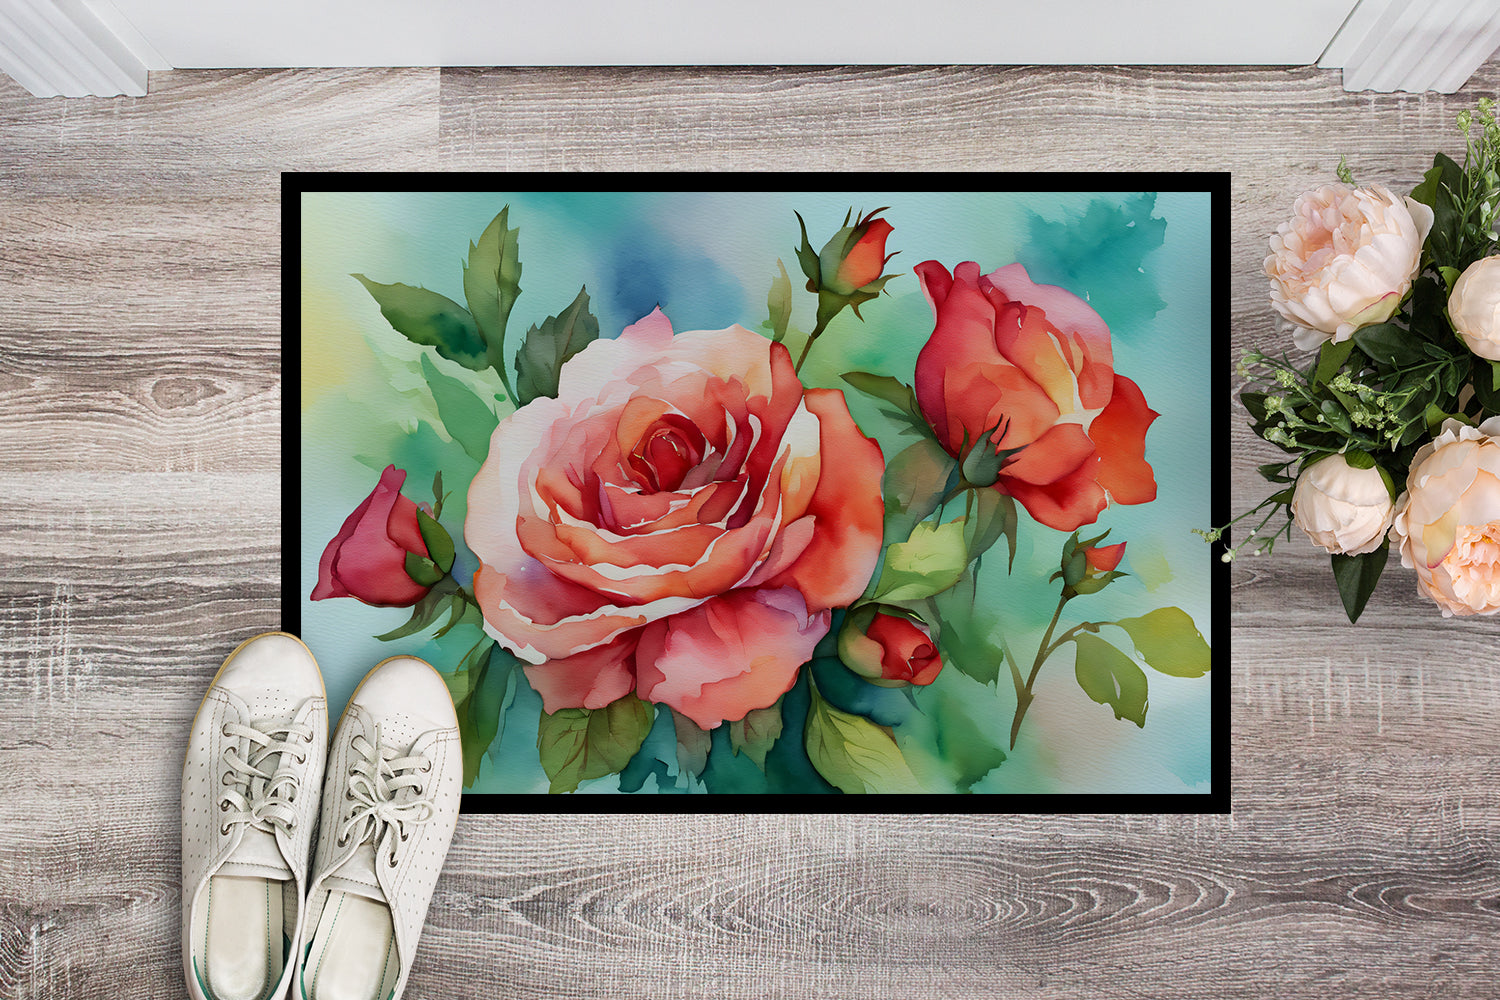 Buy this Oklahoma Roses in Watercolor Indoor or Outdoor Mat 24x36